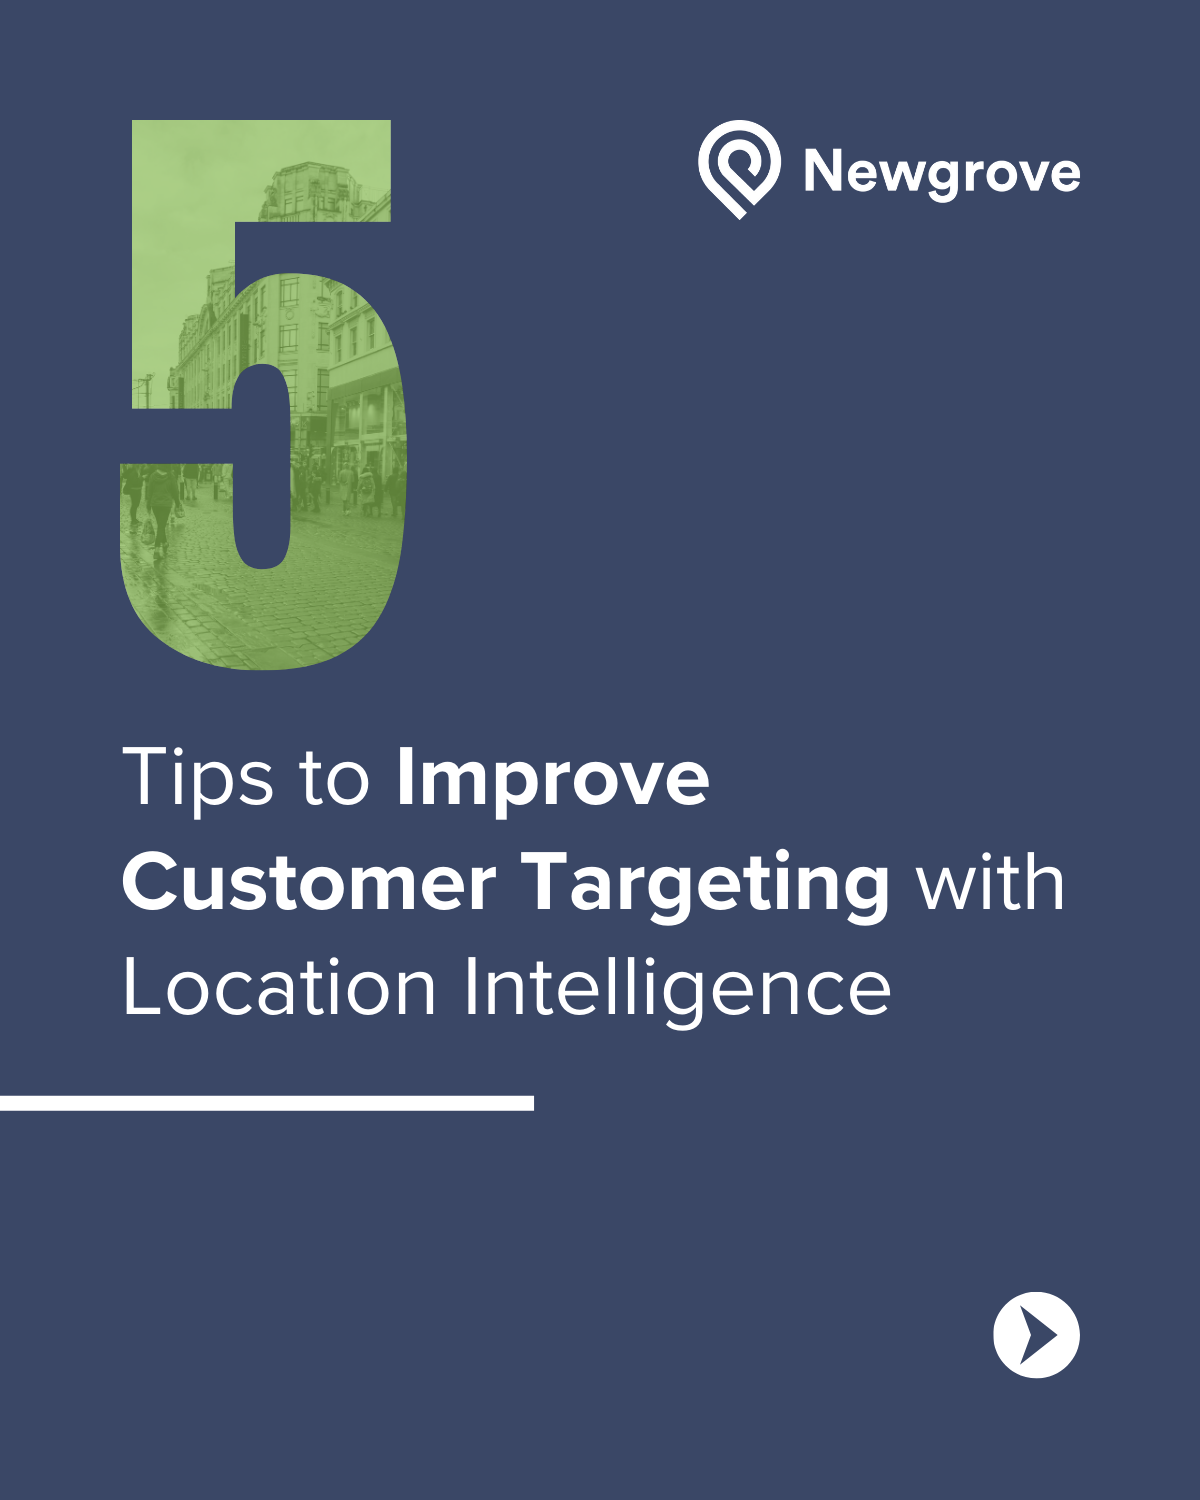 5 Tips to Improve Customer Targeting with Location Intelligence v2